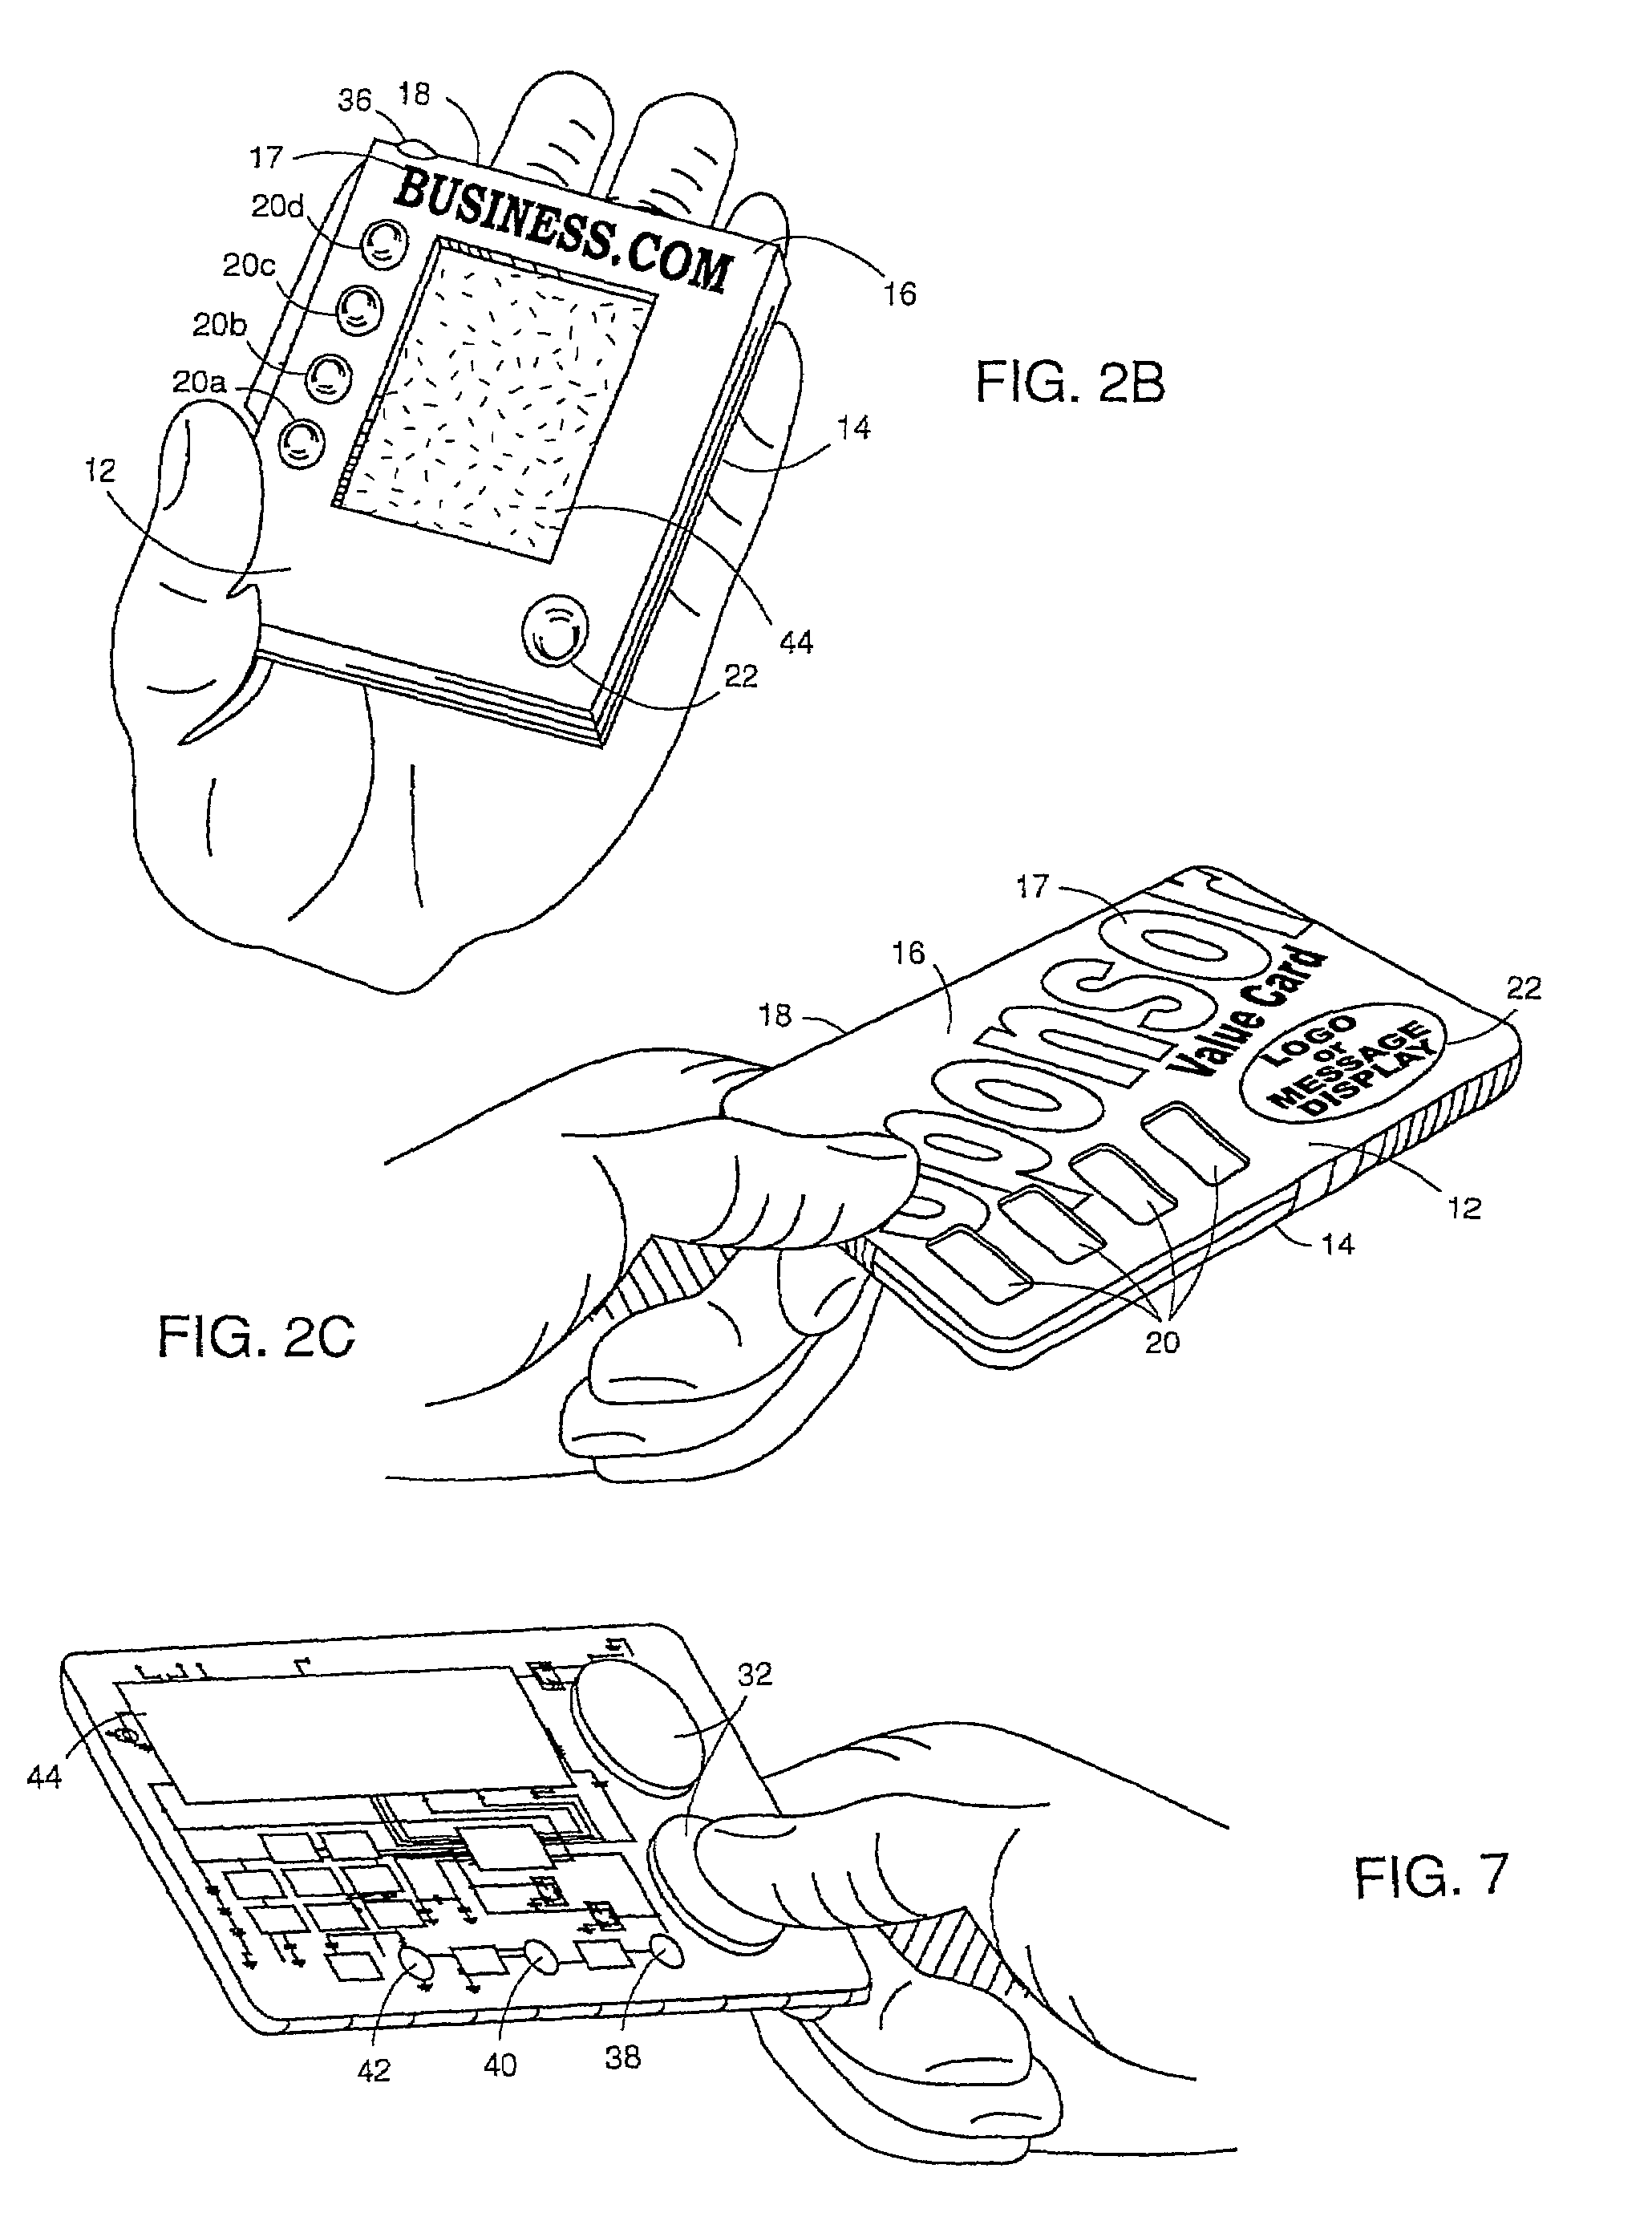 Universal methods and device for hand-held promotional opportunities